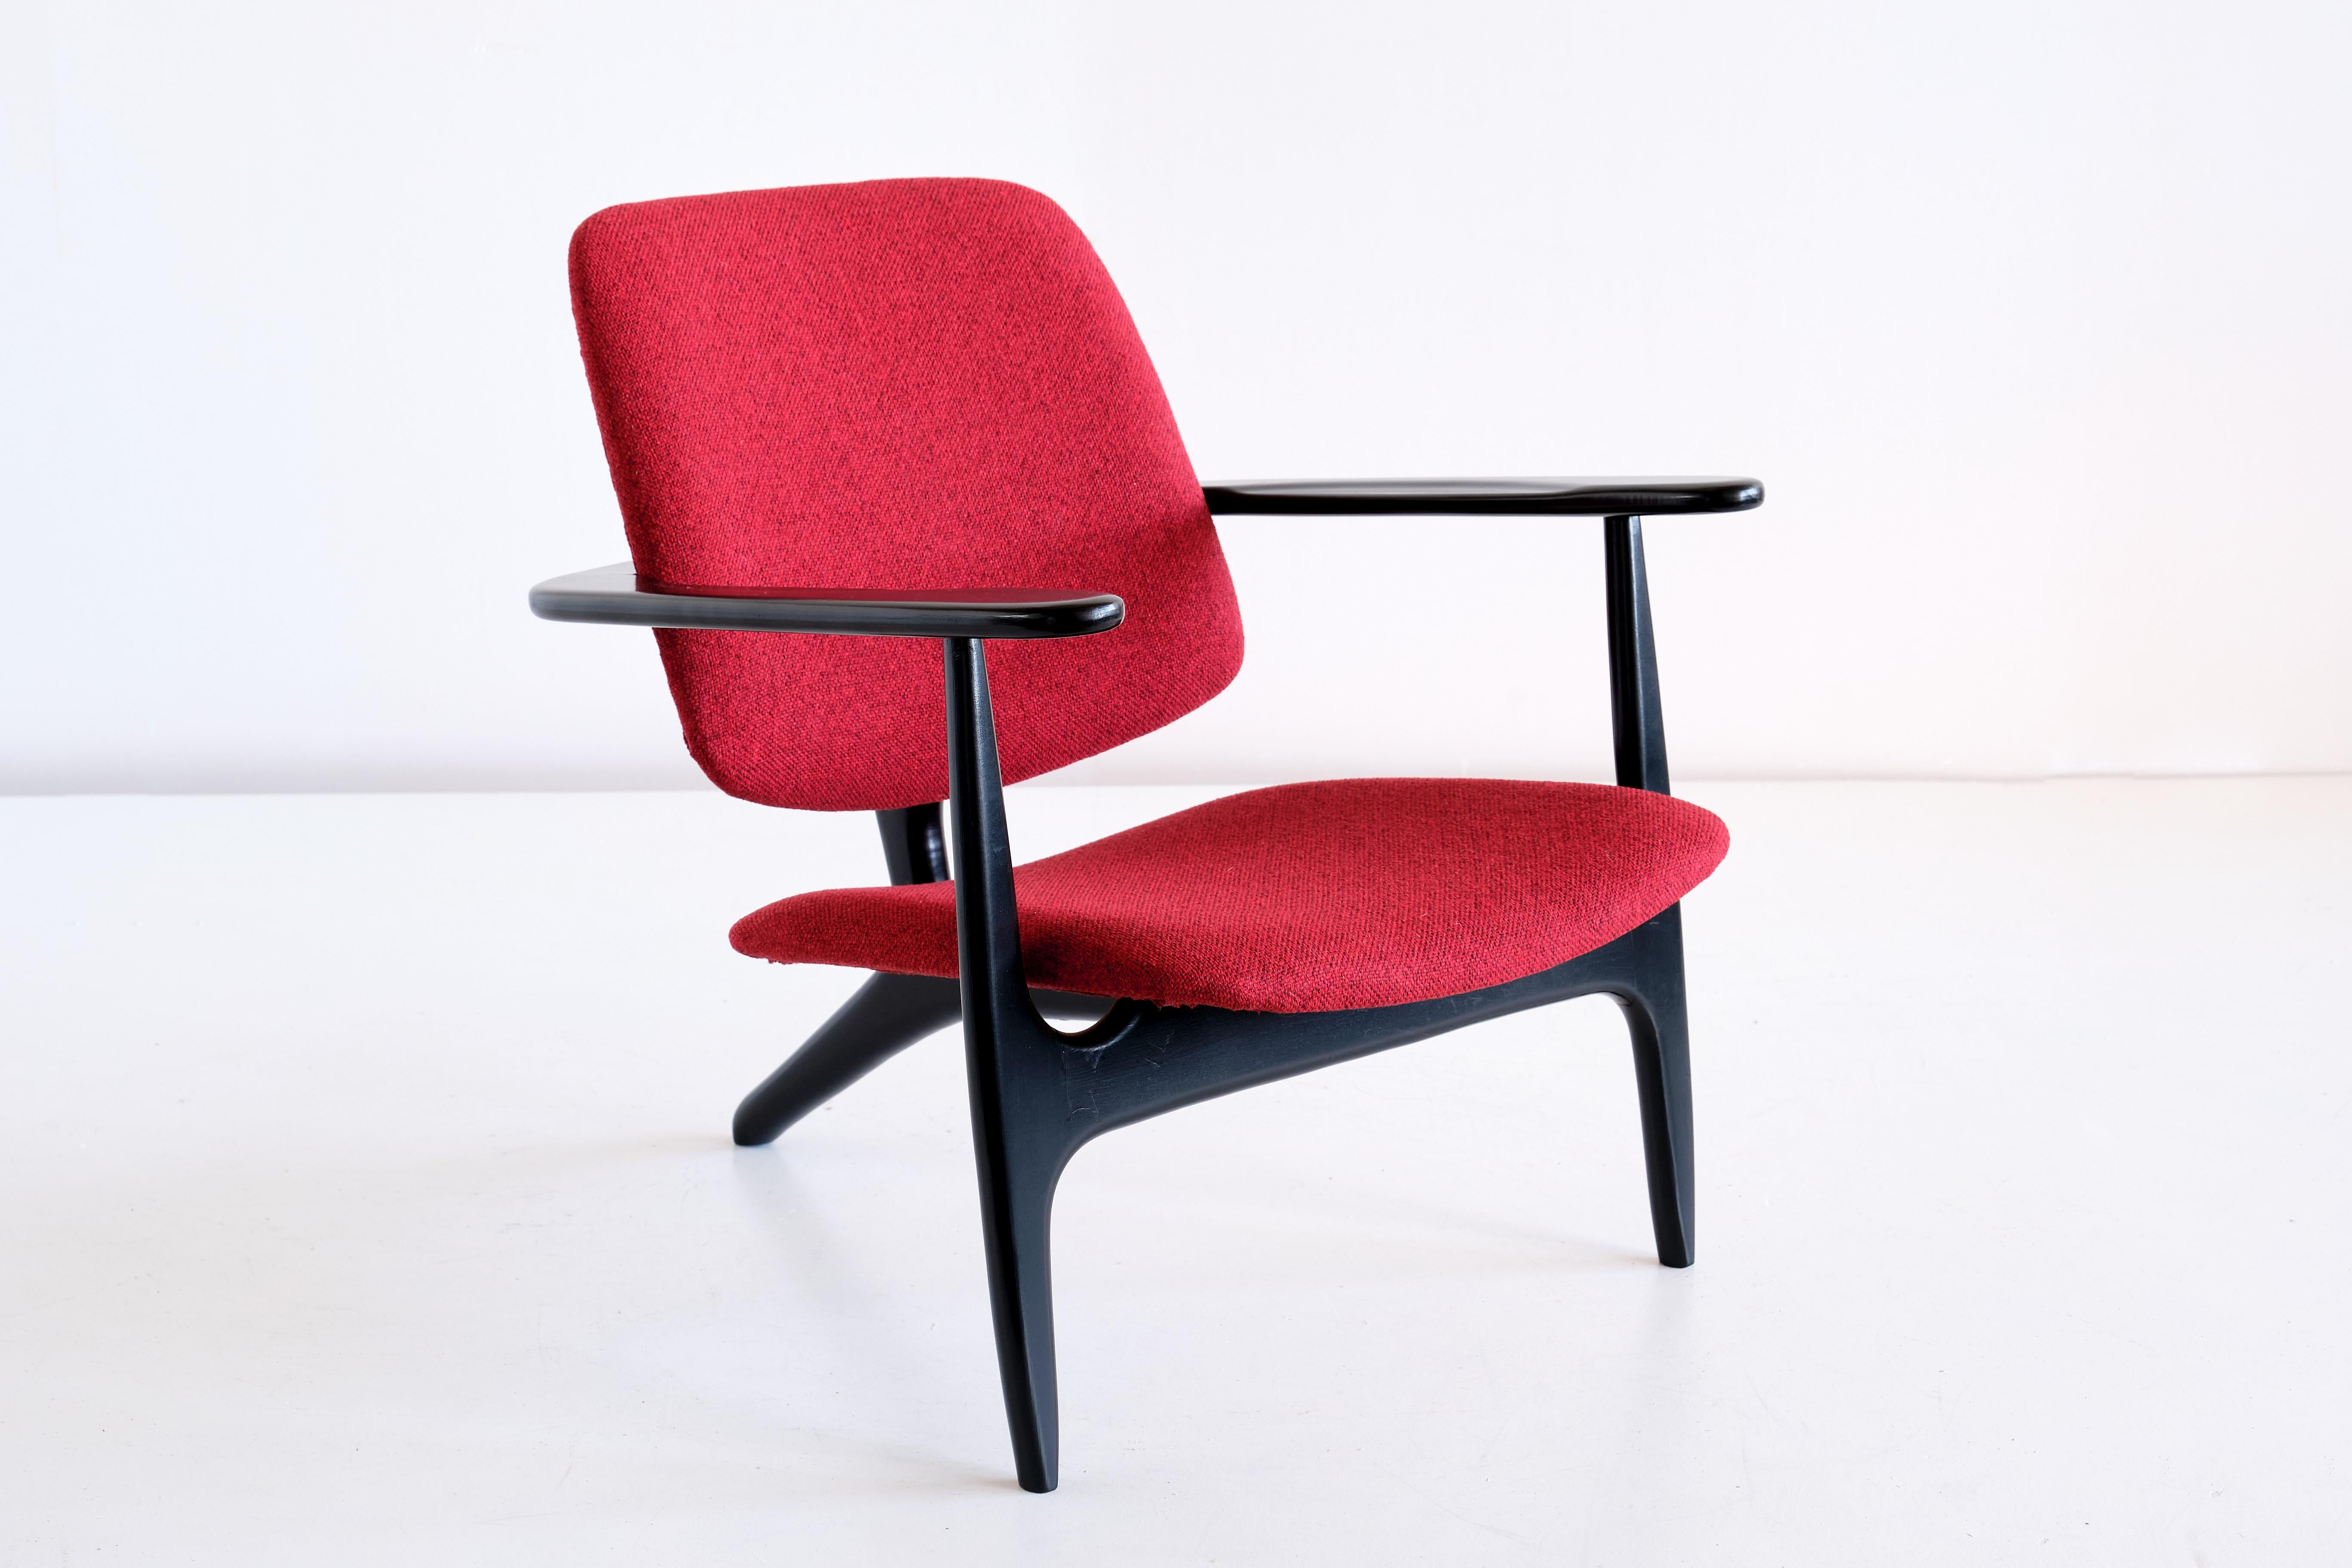 The S3 chair was designed by Alfred Hendrickx and produced by Belform in Belgium in 1958. This rare chair was a custom design by Hendrickx for the Sabena Airlines first class lounge in Zaventem Airport, Brussels. The three-legged, black lacquered